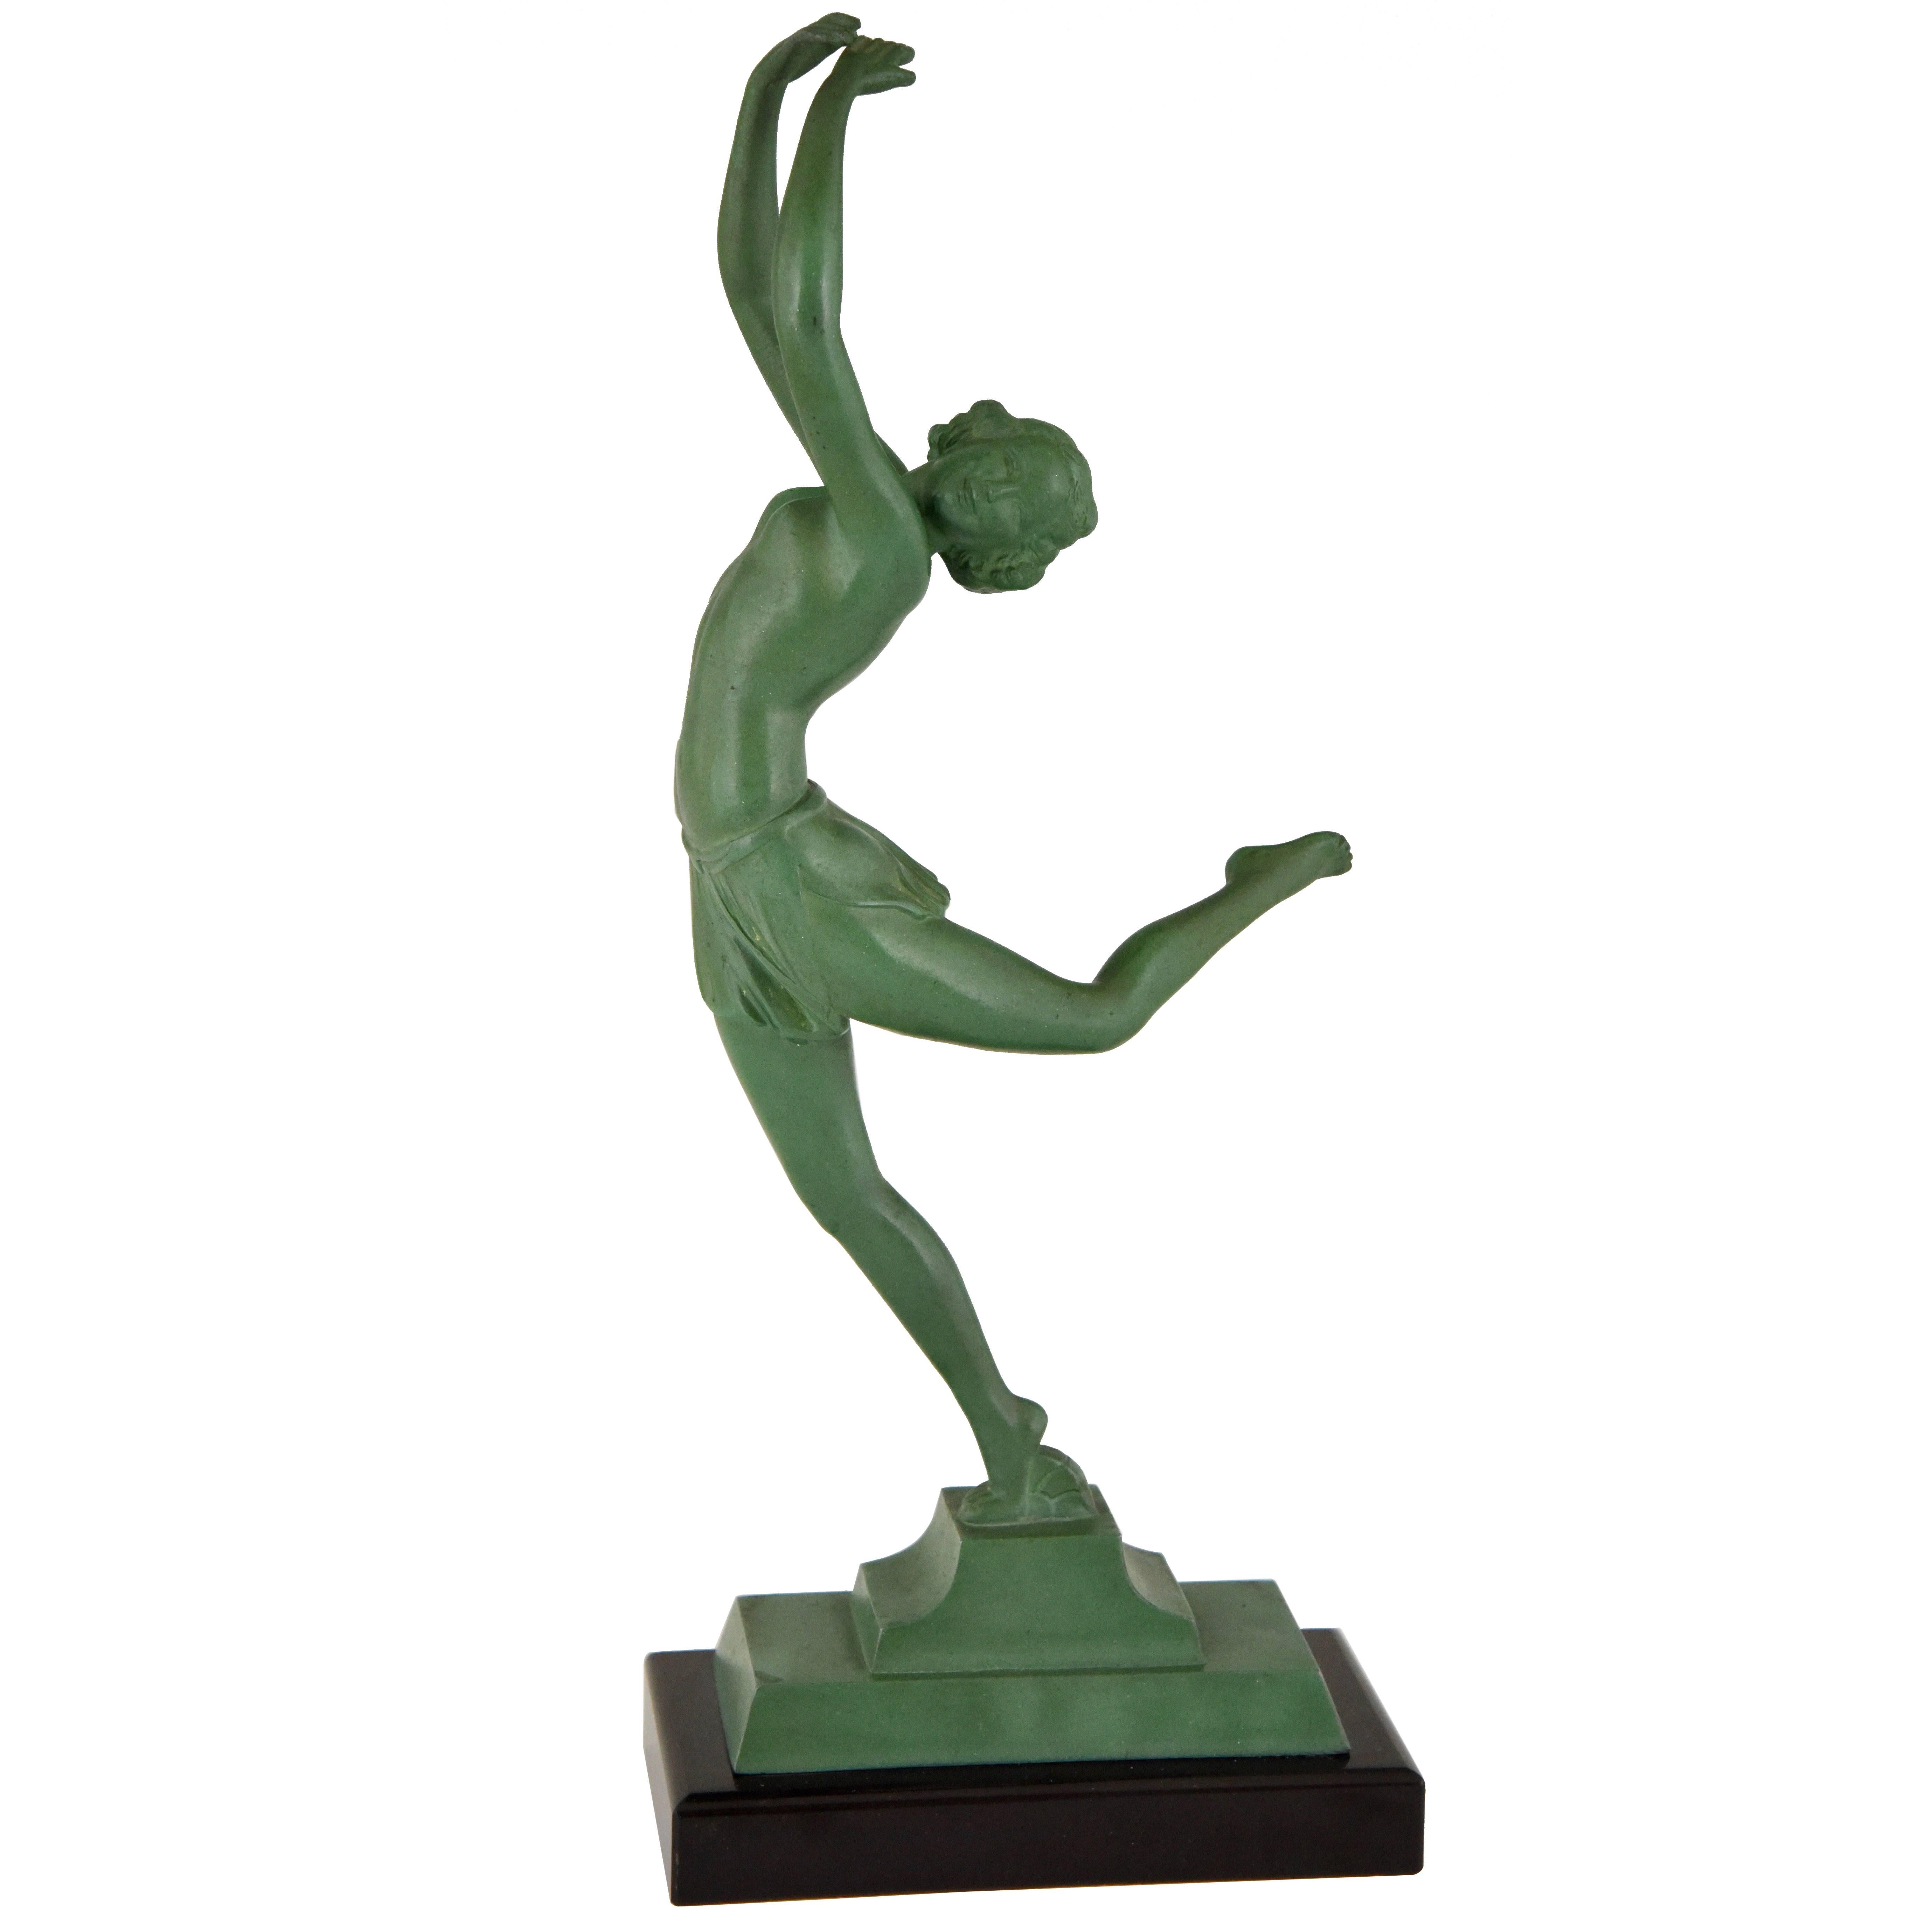 French Art Deco Sculpture of a Dancer on Marble Base, 1930